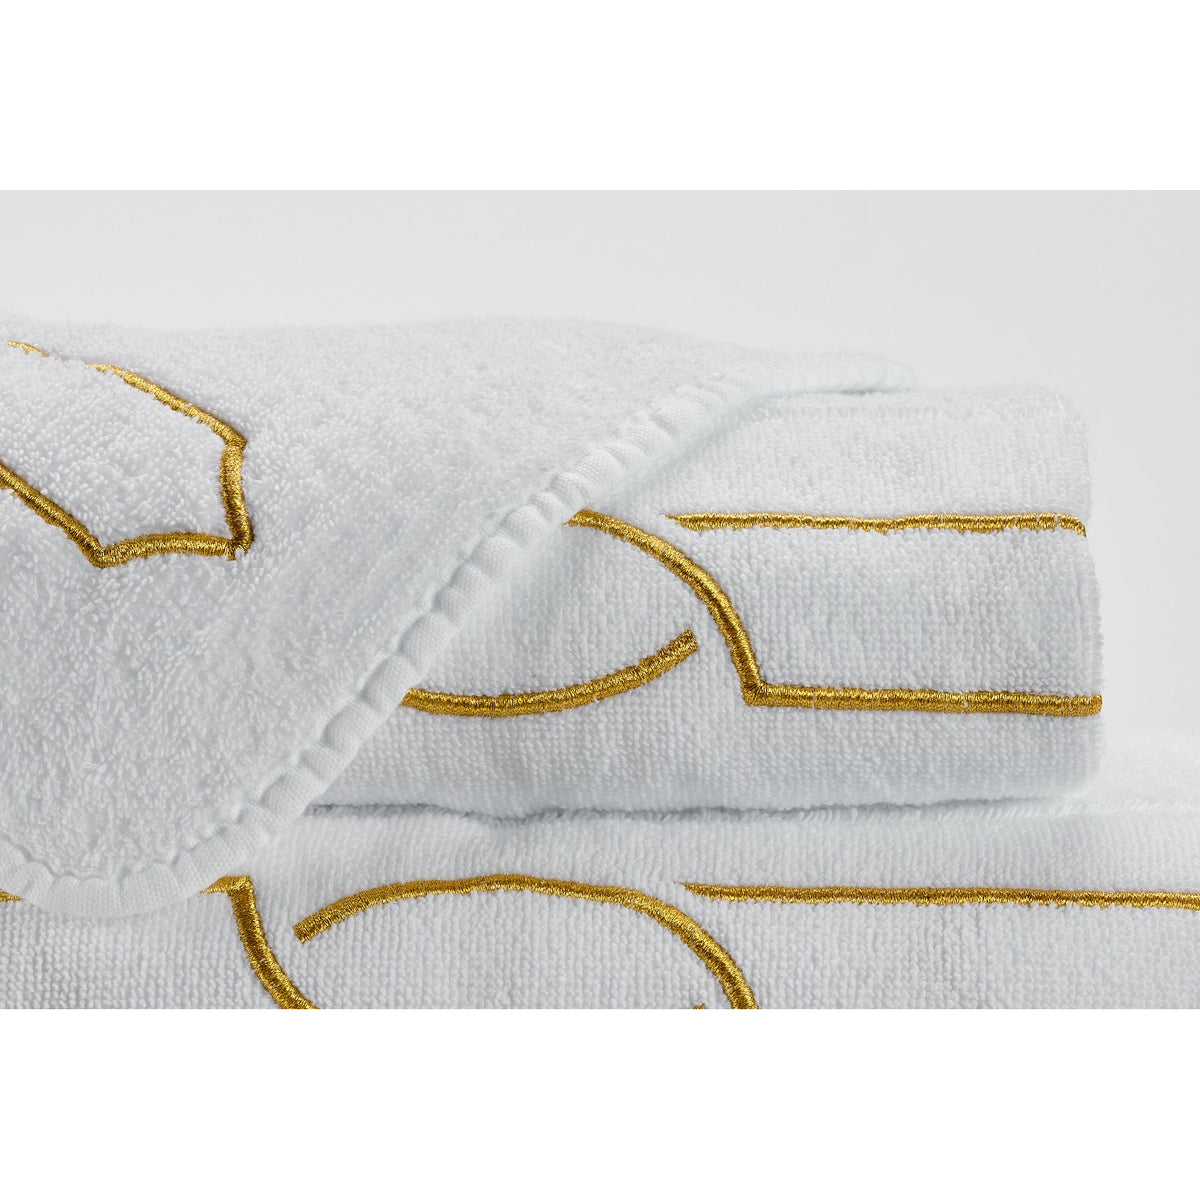 Abyss Cluny Bath Towel Close Up White/Gold (108) Fine Linens